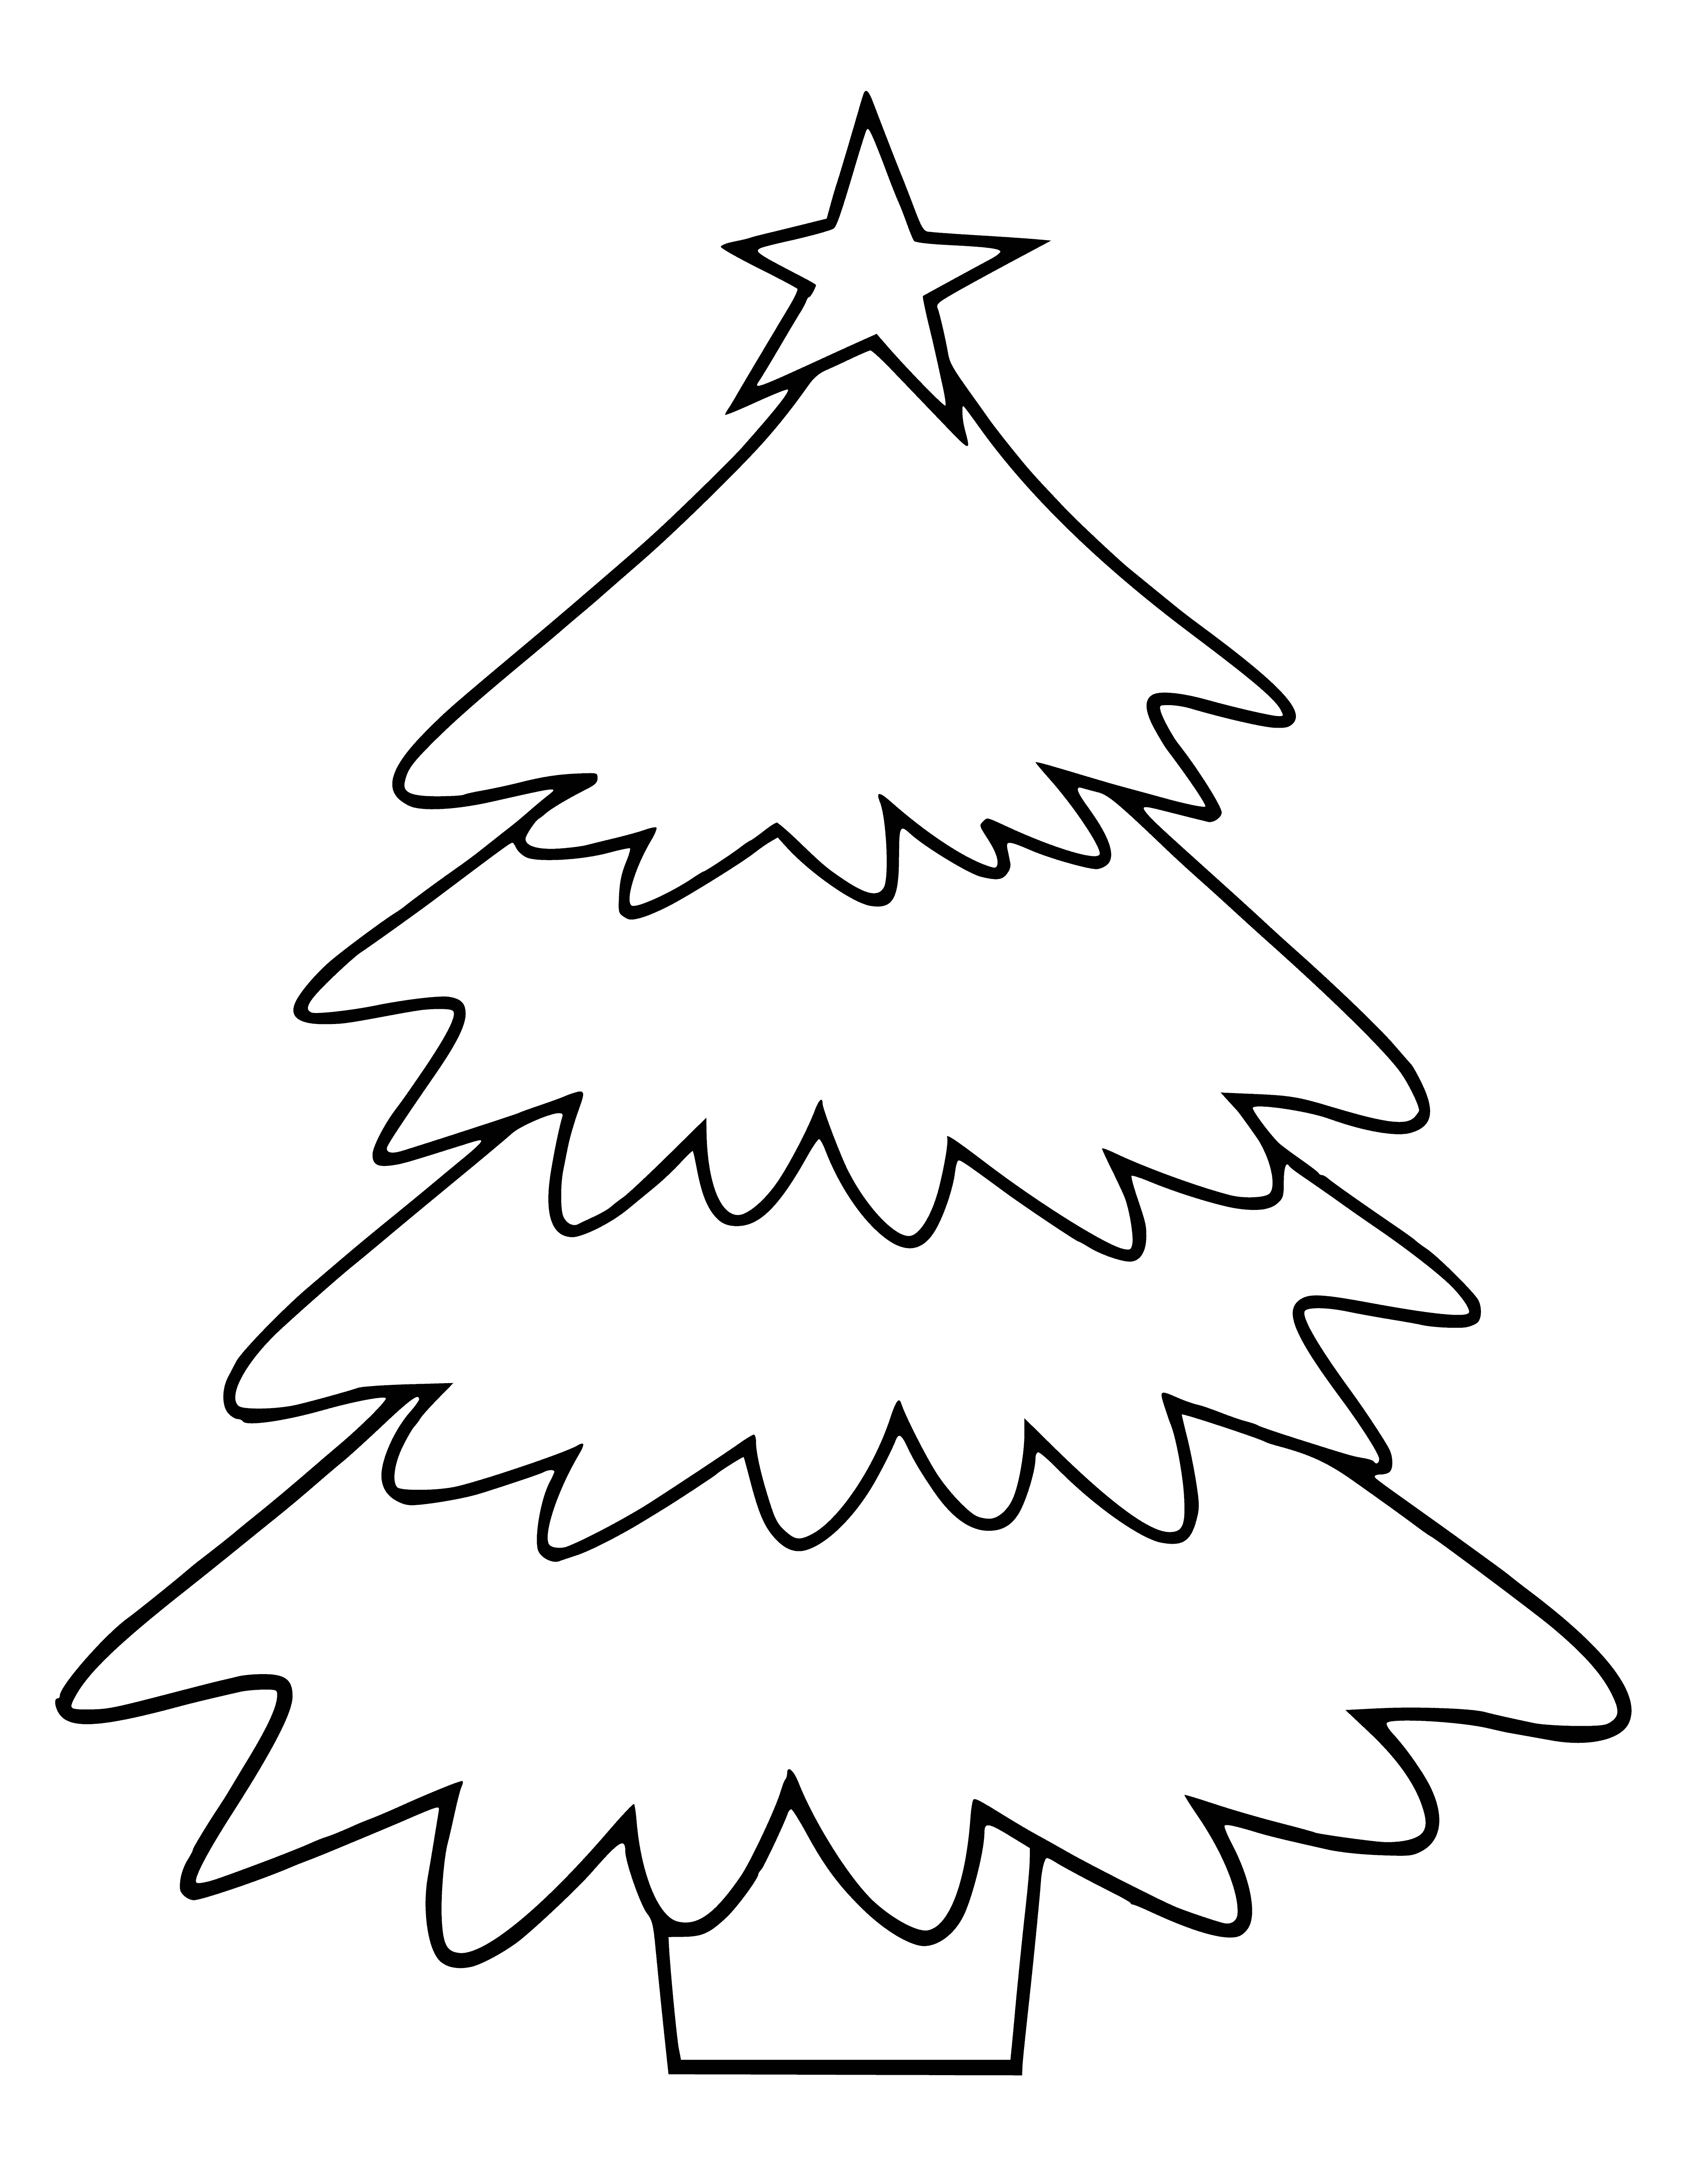 Coloring pages of simple Christmas tree with star & gifts, fit for a festive activity! #ChristmasCrafts #ColoringPages